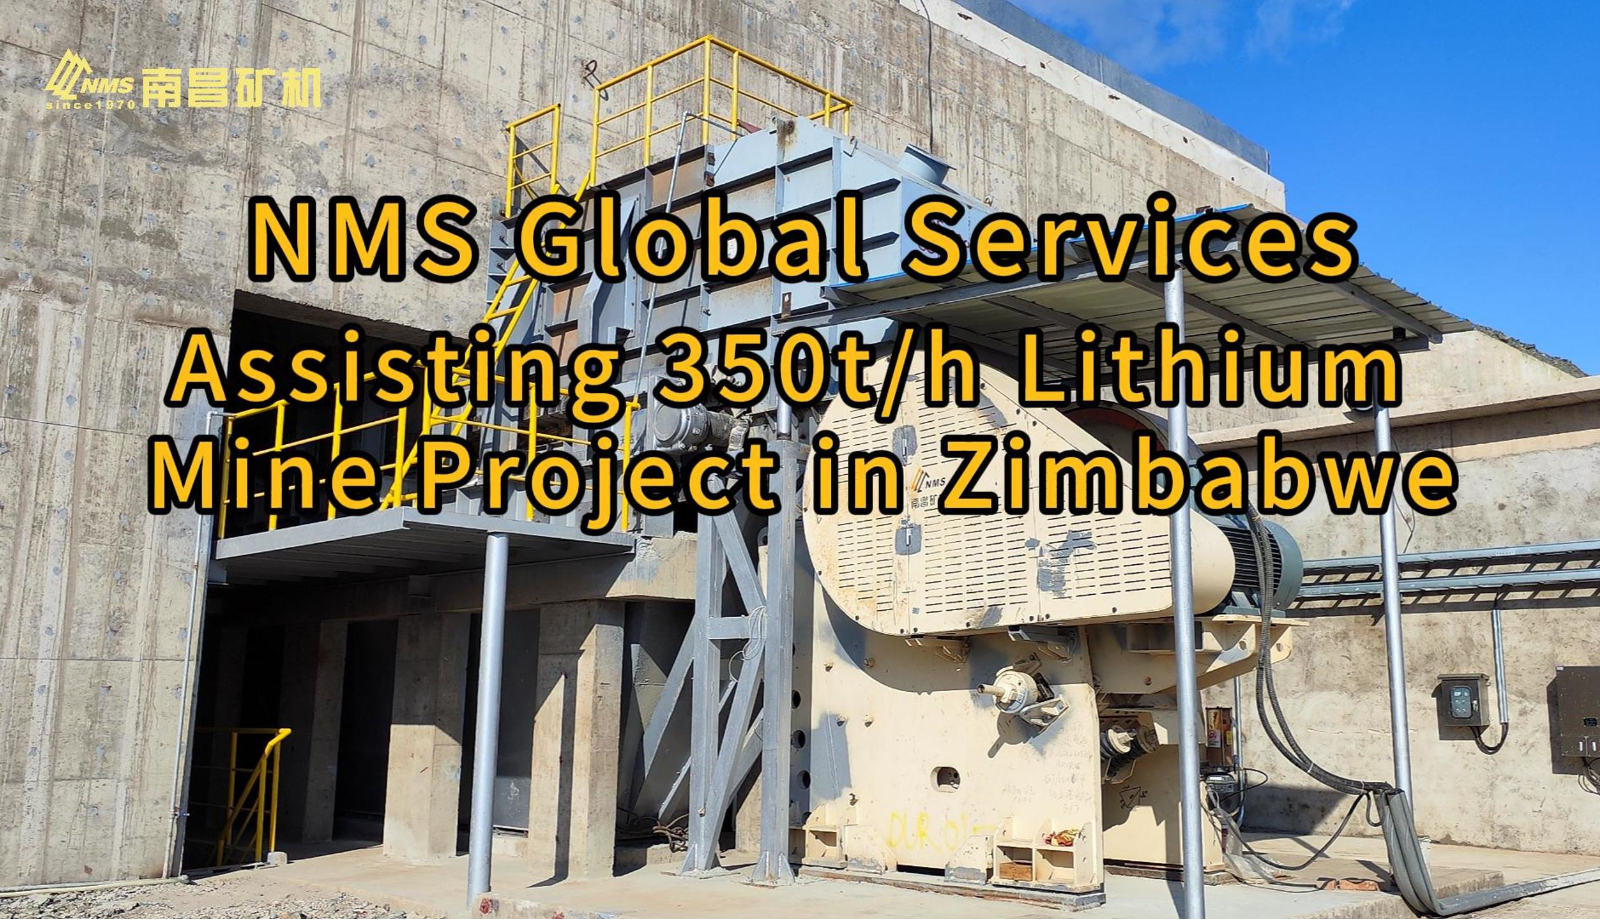 NMS Global Services | Assisting 350t/h Lithium Mine Project in Zimbabwe